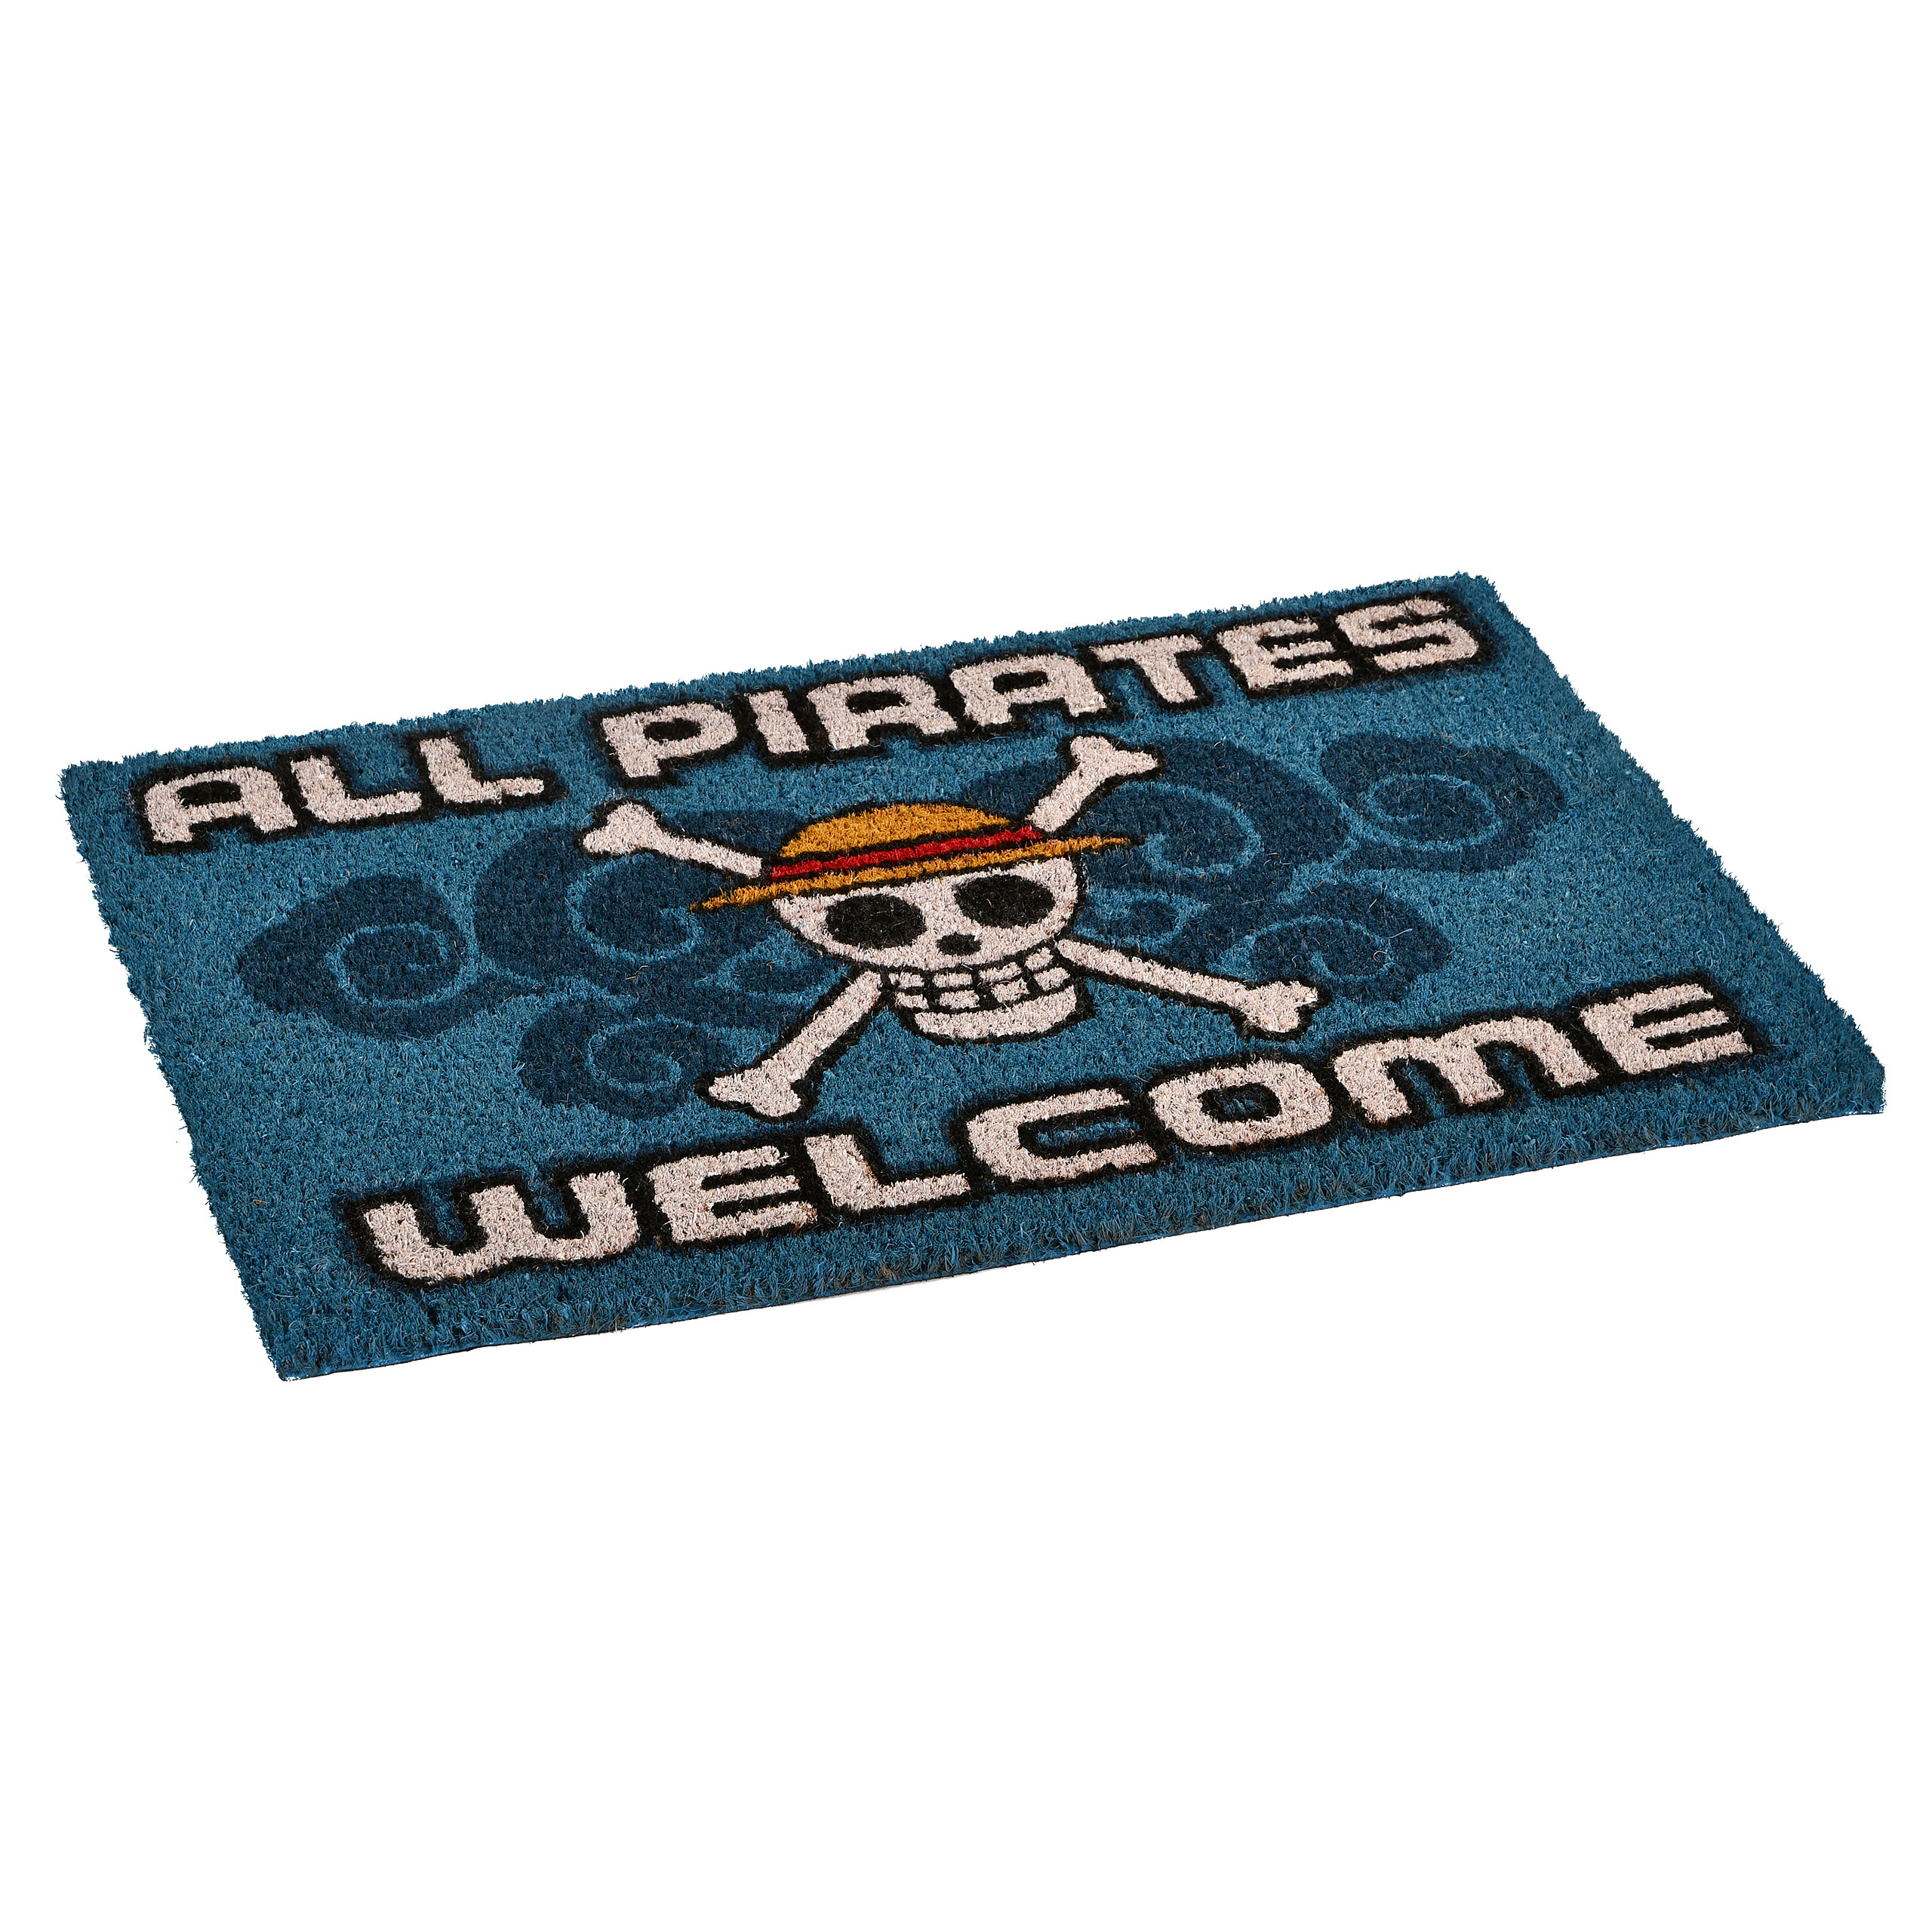 One Piece - All Pirates Welcome Doormat